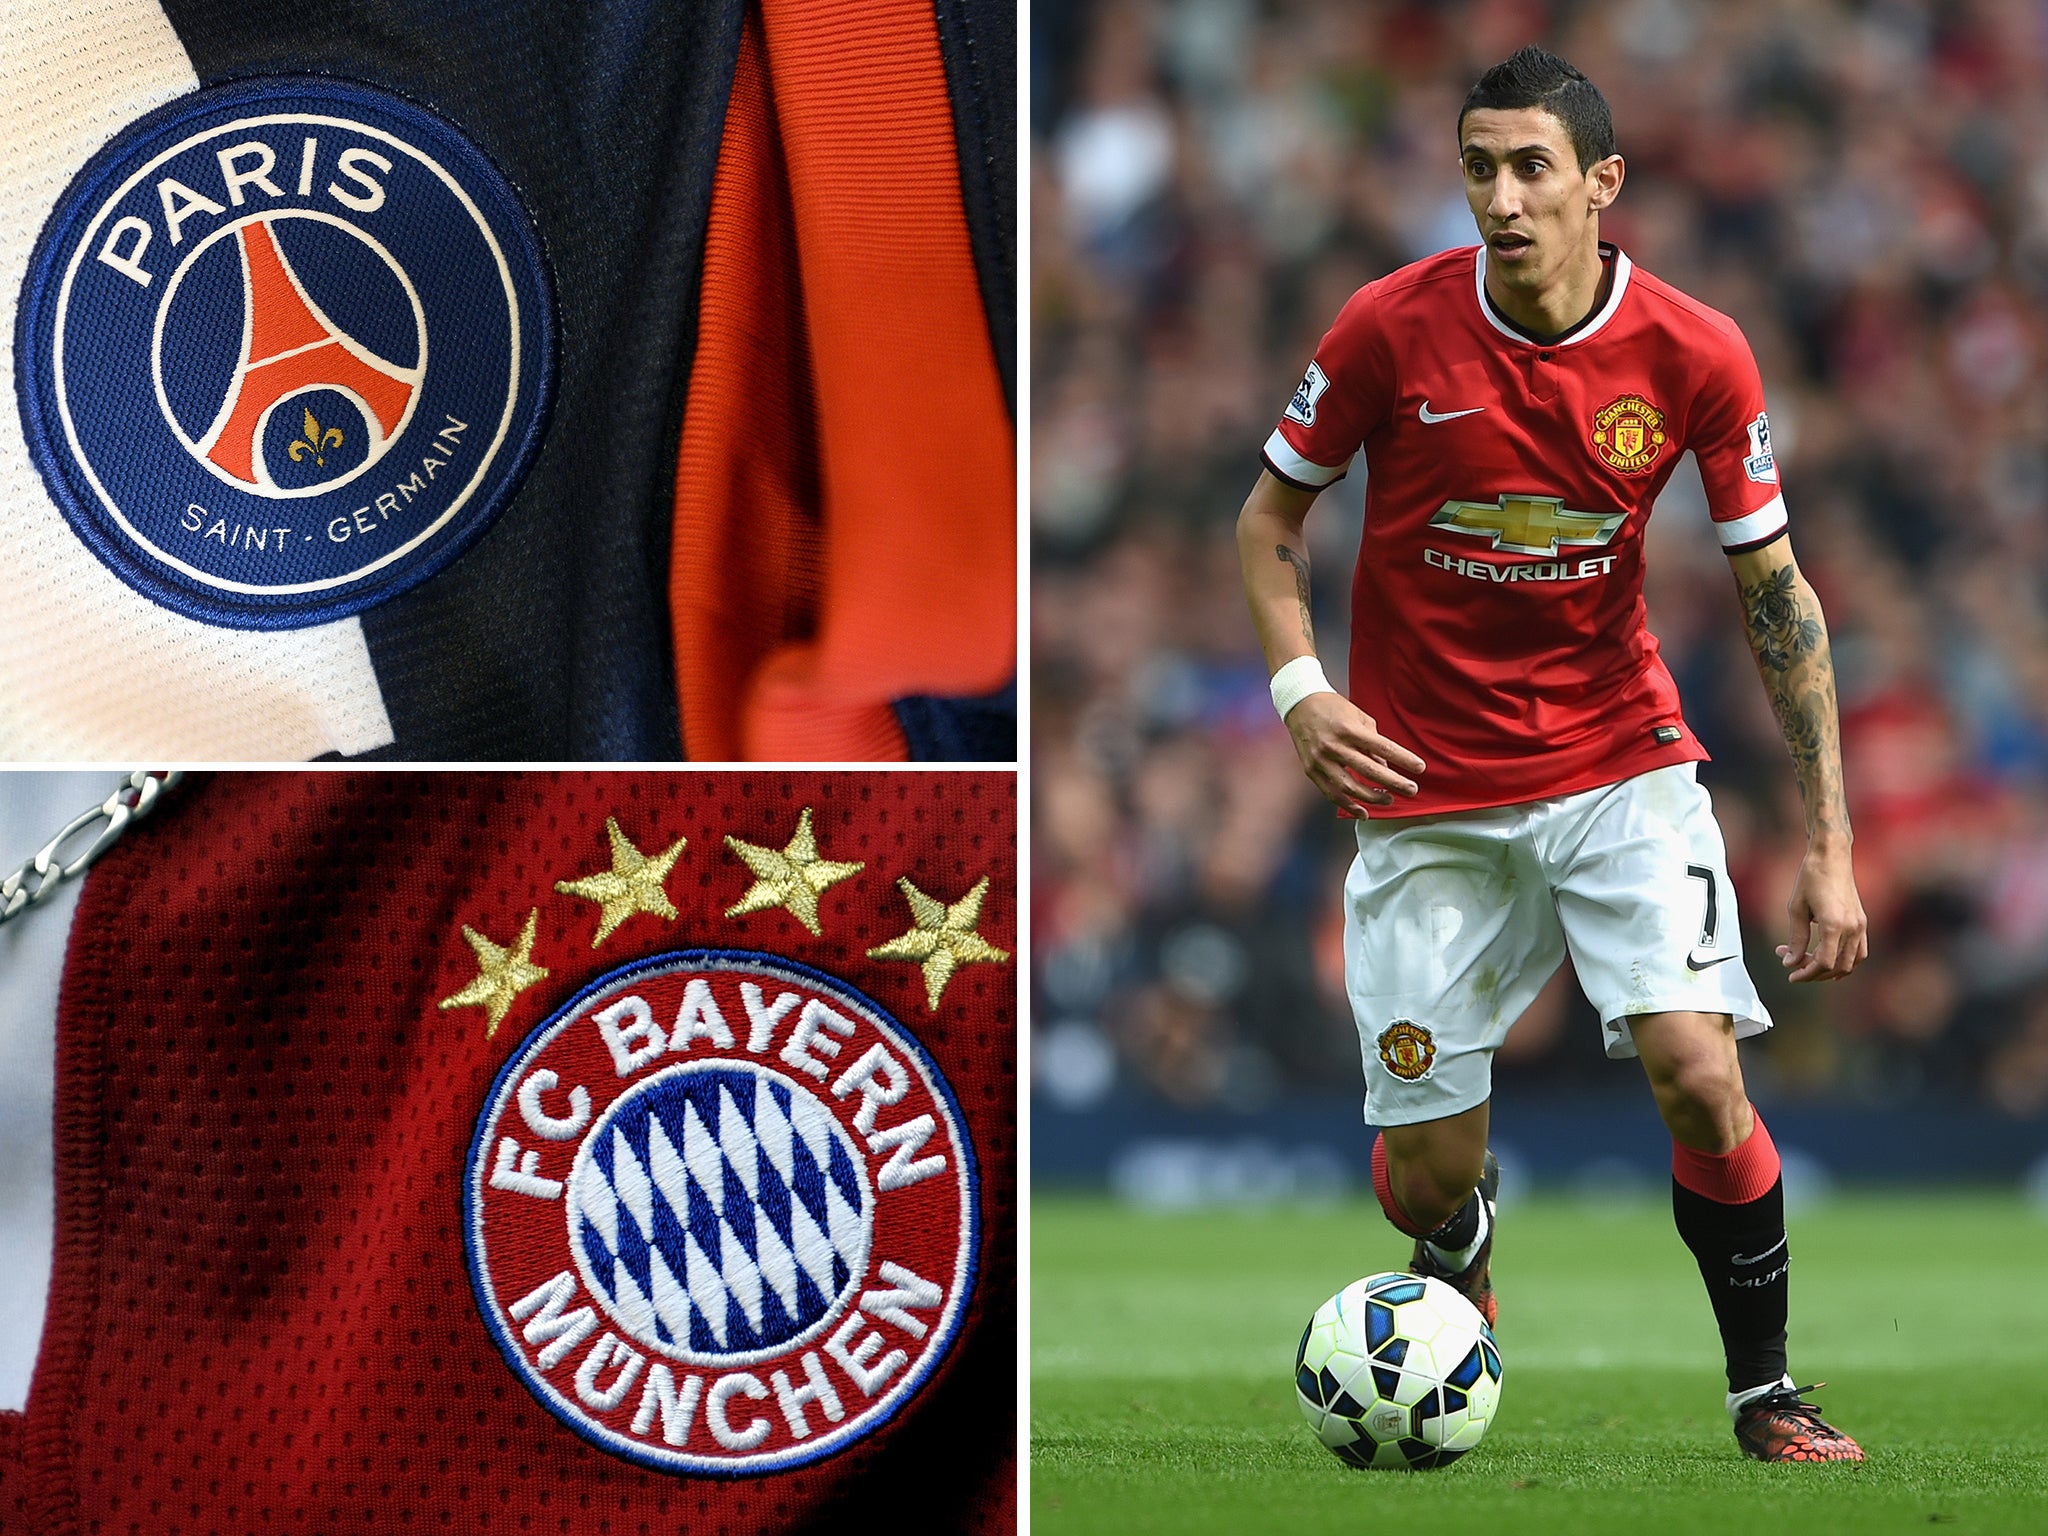 Angel Di Maria is wanted by both PSG and Bayern Munich, according to reports